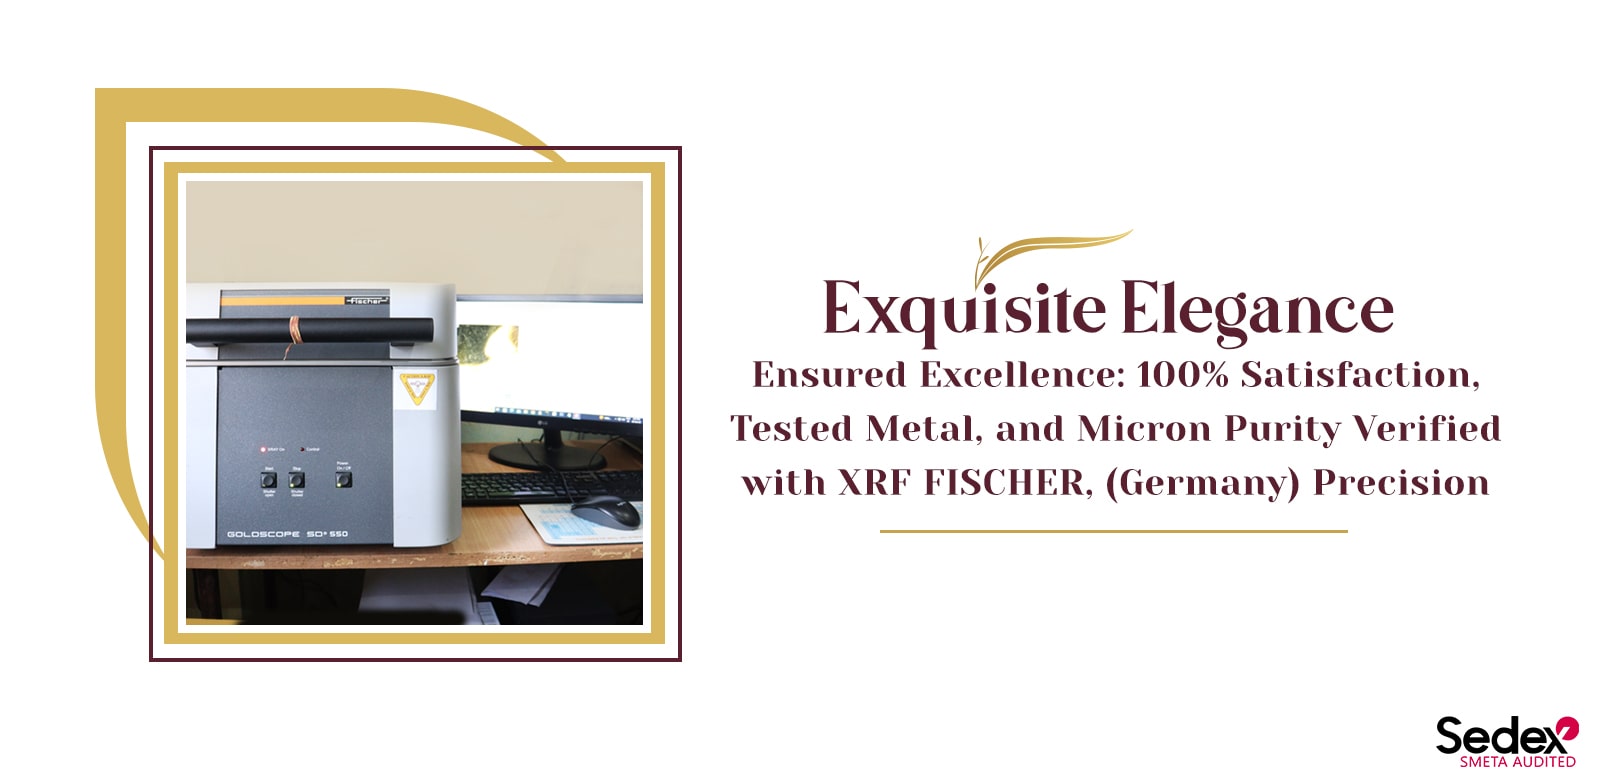 Exquisite Elegance, Ensured Excellence: 100% Satisfaction, Tested Metal, and Micron Purity Verified with XRF FISCHER(Germany) Precision